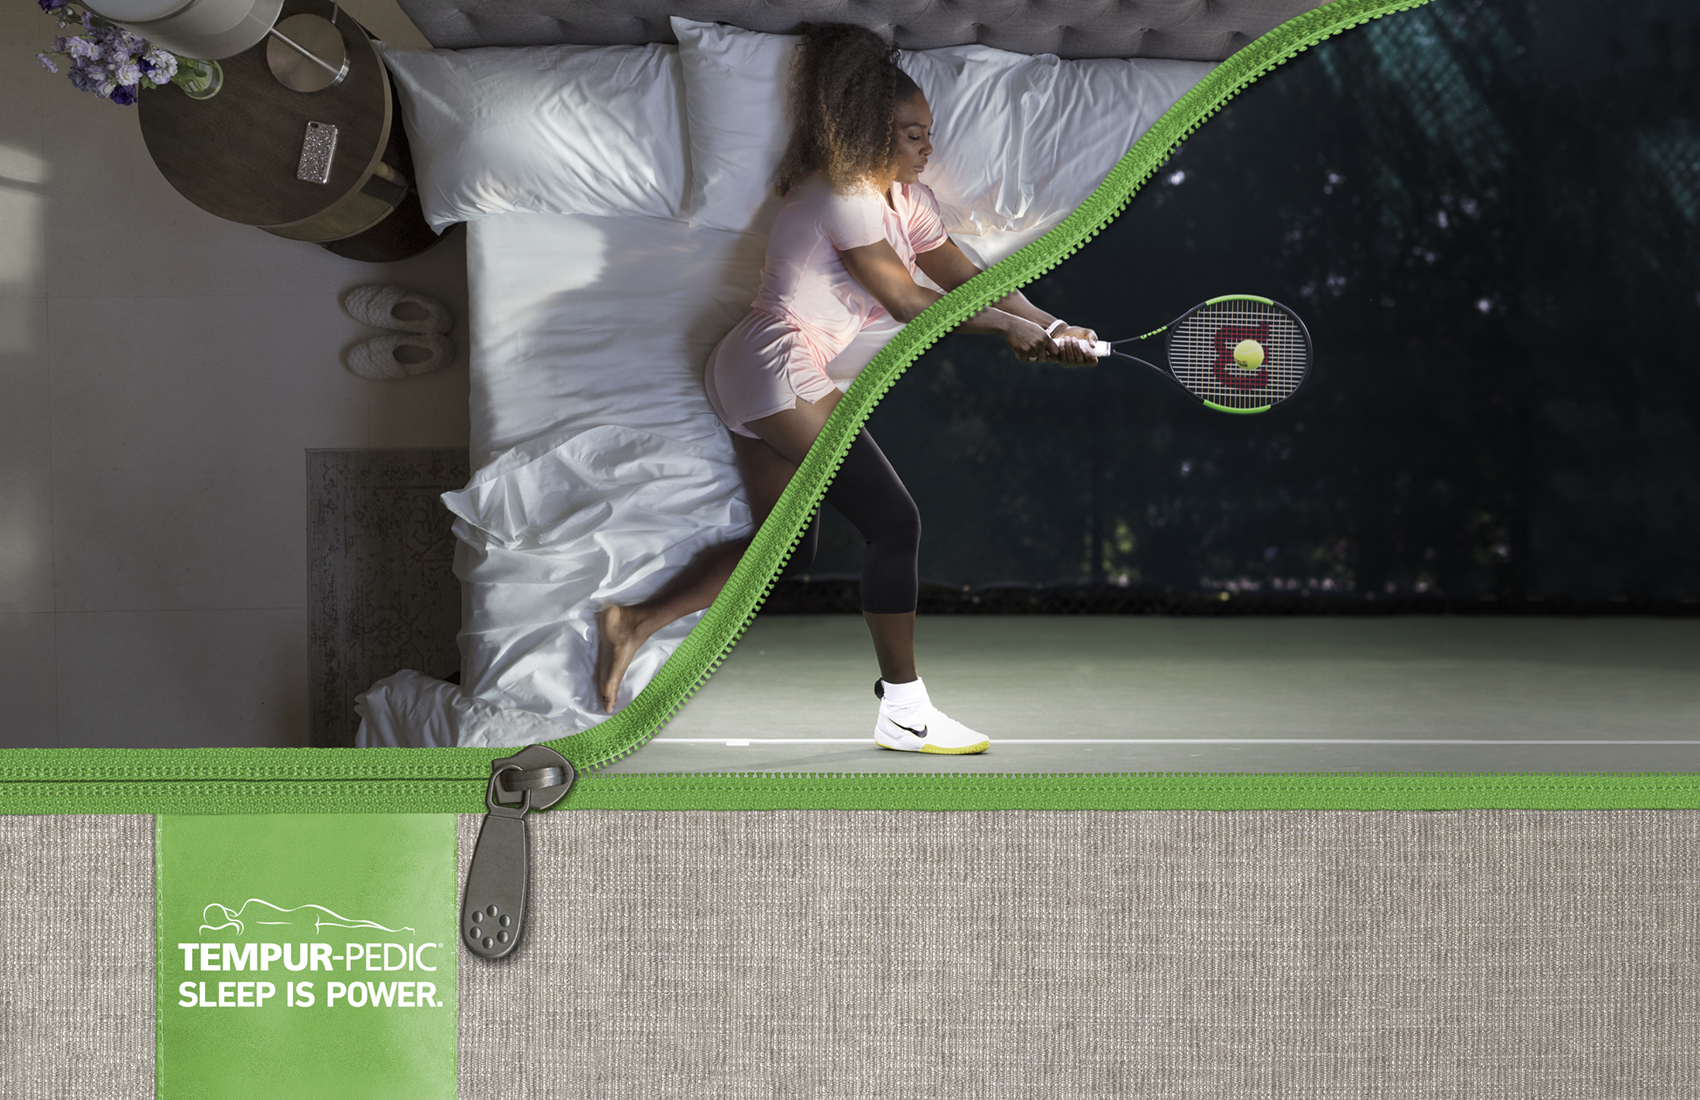 Serena Williams, the most dominant tennis player of all-time and a Tempur-Pedic owner for 10 years, is featured in the new ?Tempur-Pedic Sleep Is Power? campaign to illustrate the importance of sleep in achieving success.